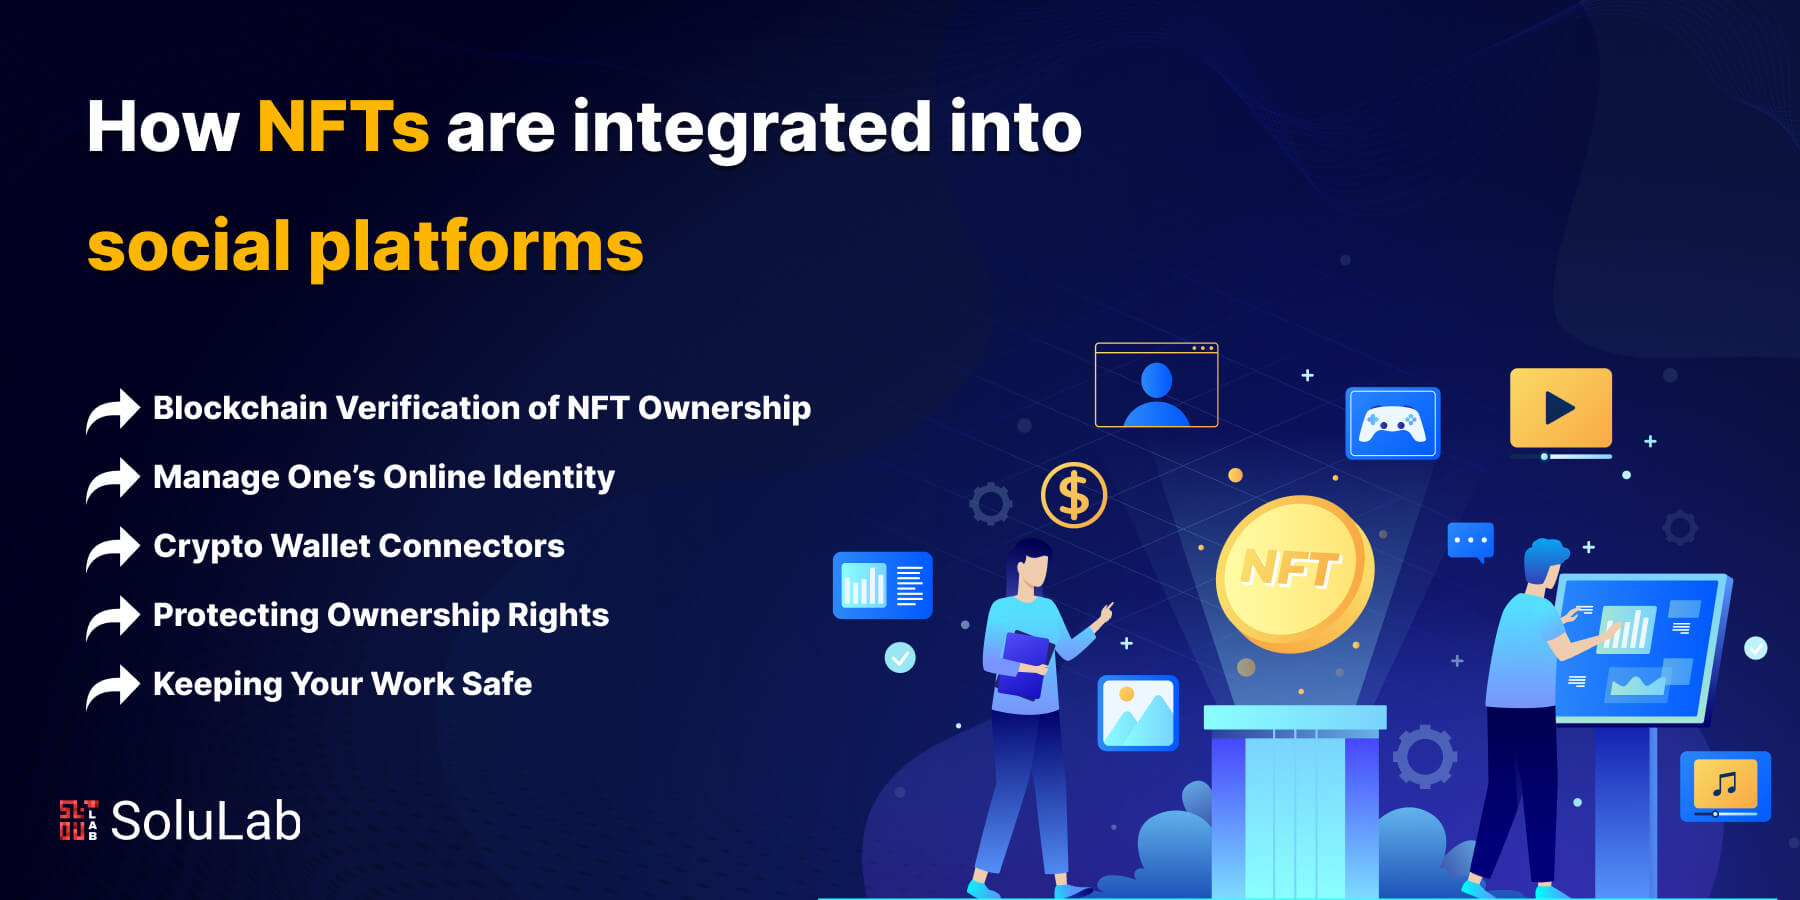 How are NFTs Integrated into Social Platforms?